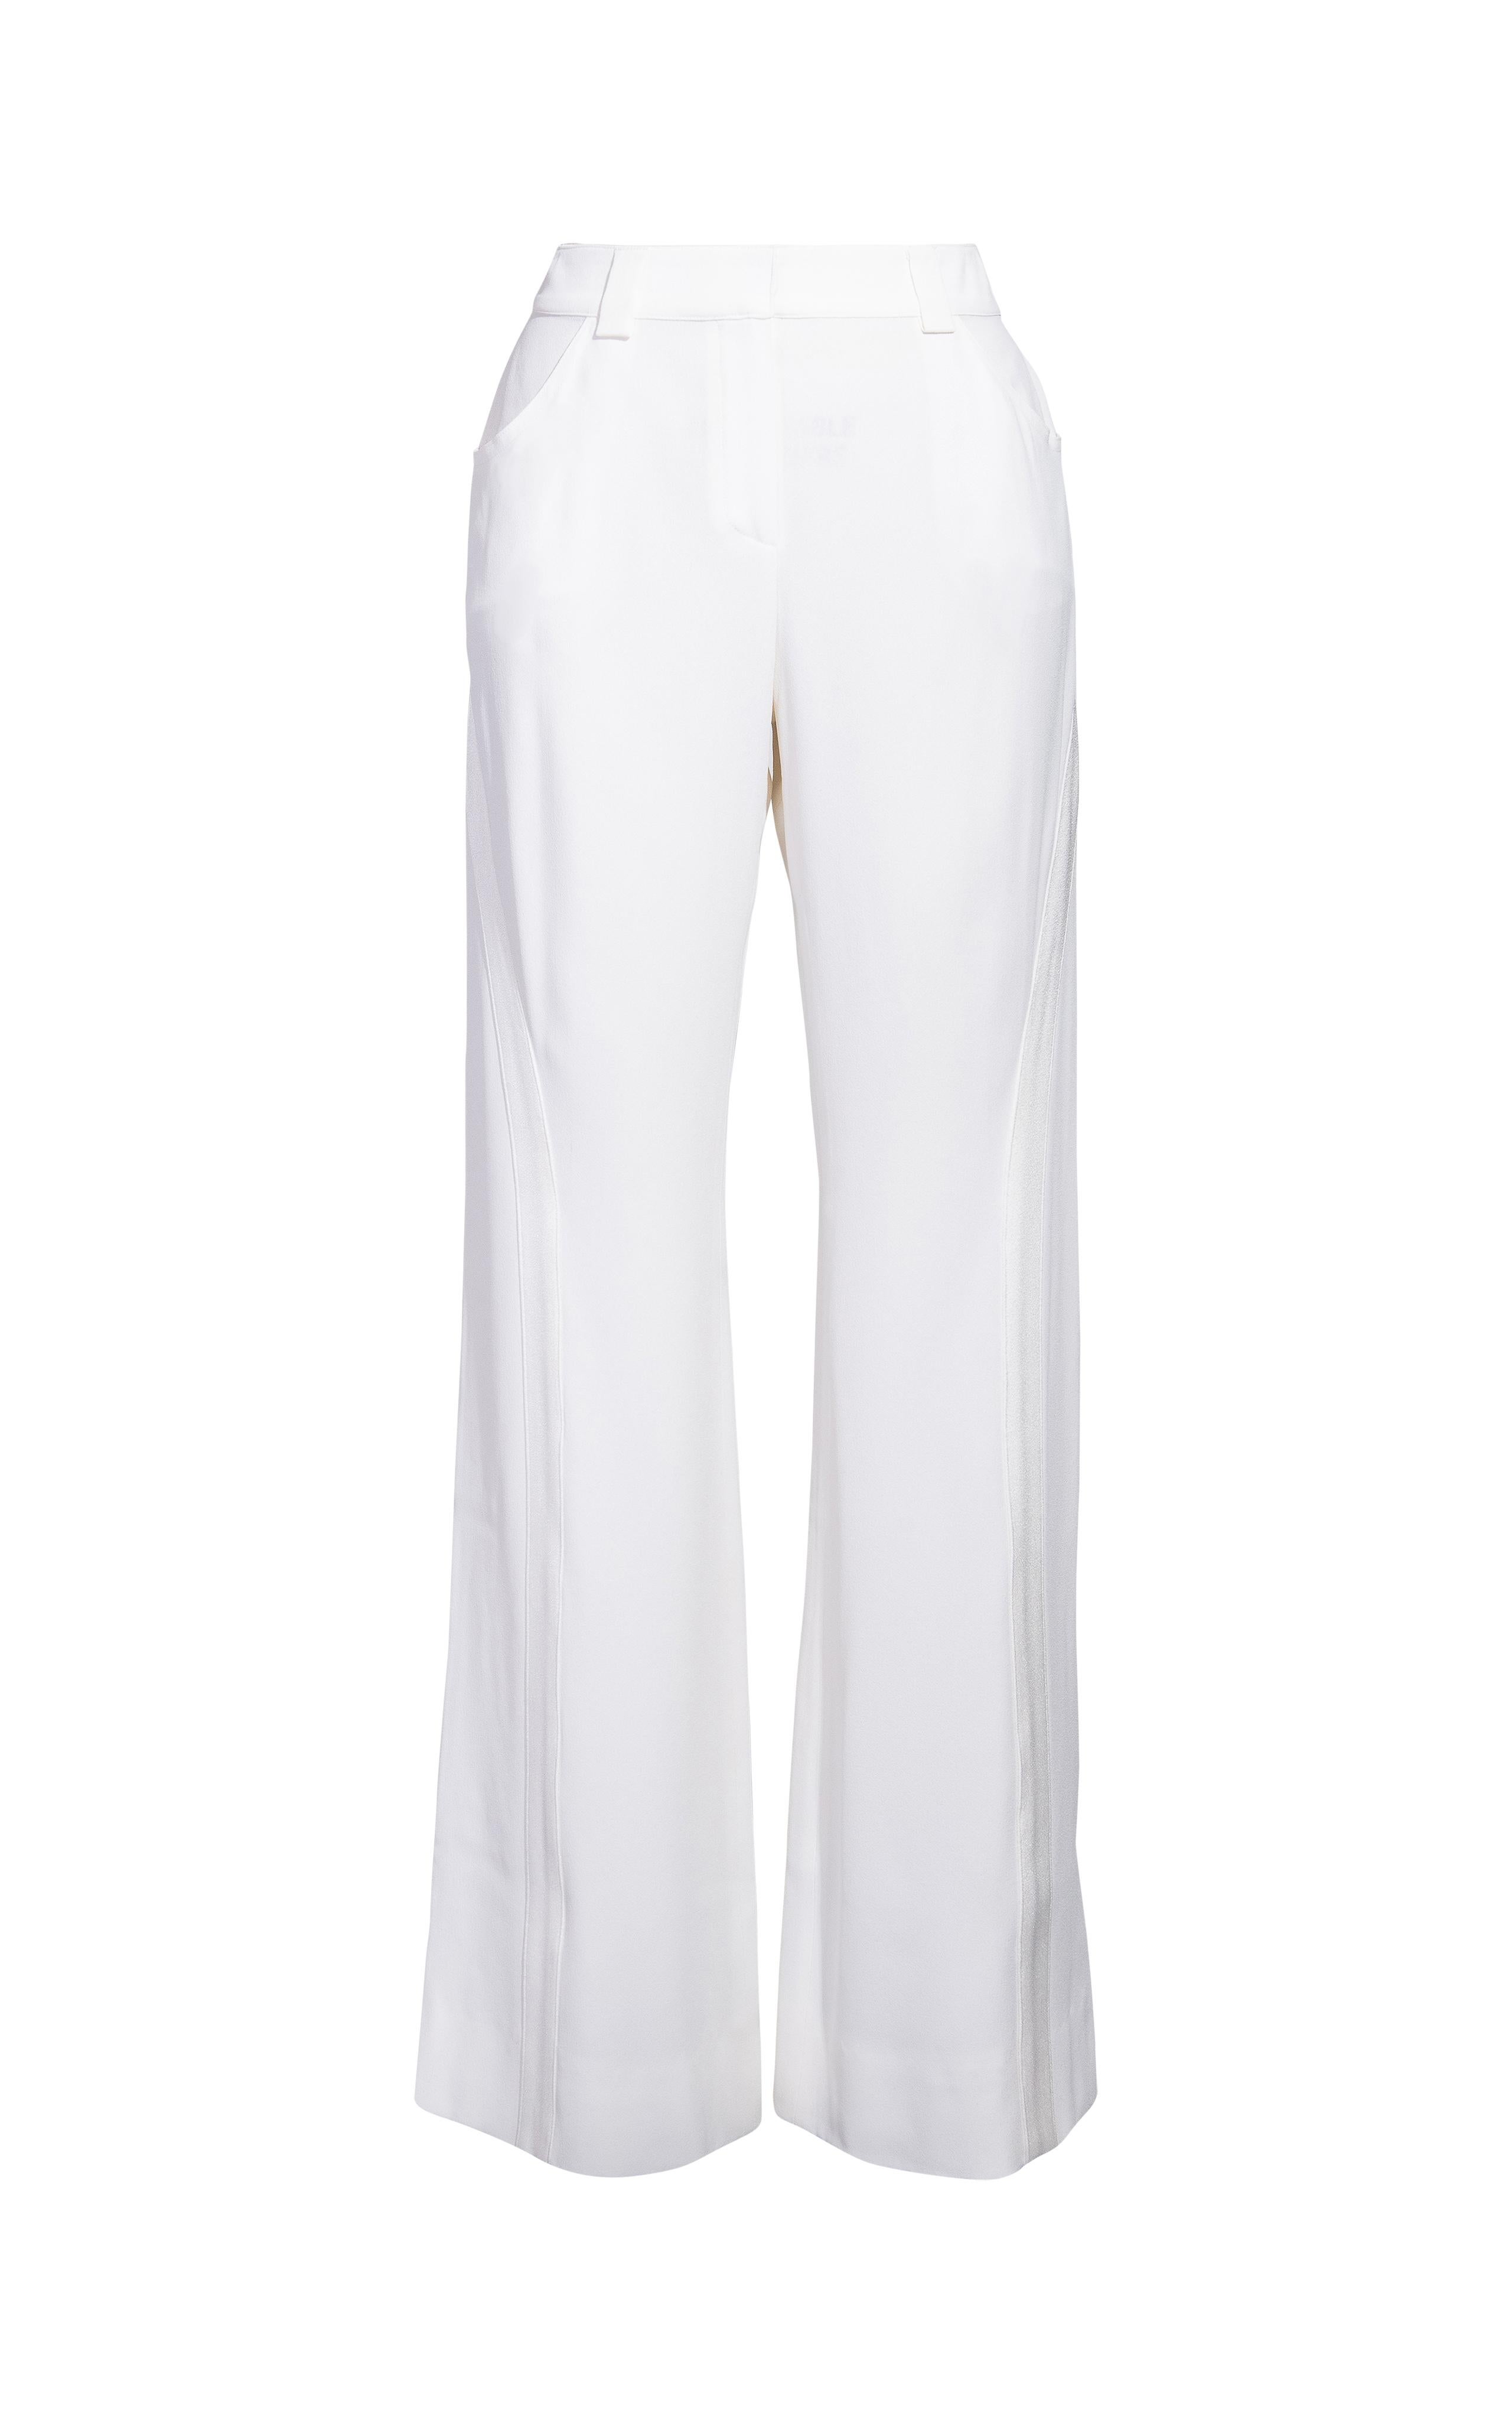 A/W 2004 Christian Dior by John Galliano White Satin Smoking Suit In Good Condition In North Hollywood, CA